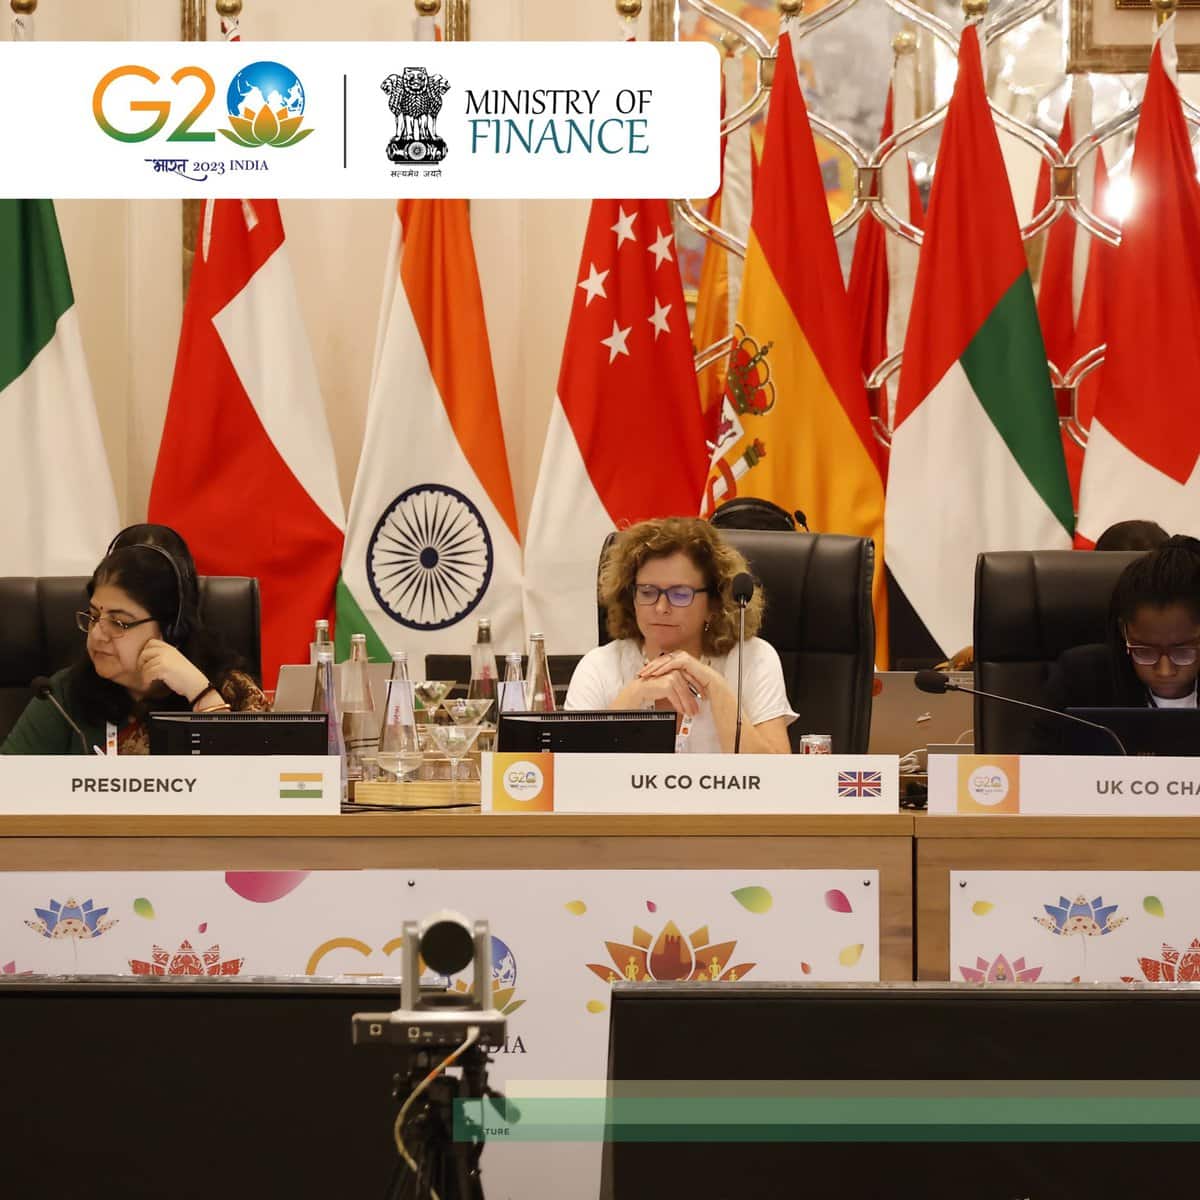 financial management group meeting addresses key economic issues under indias g20 presidency – The News Mill